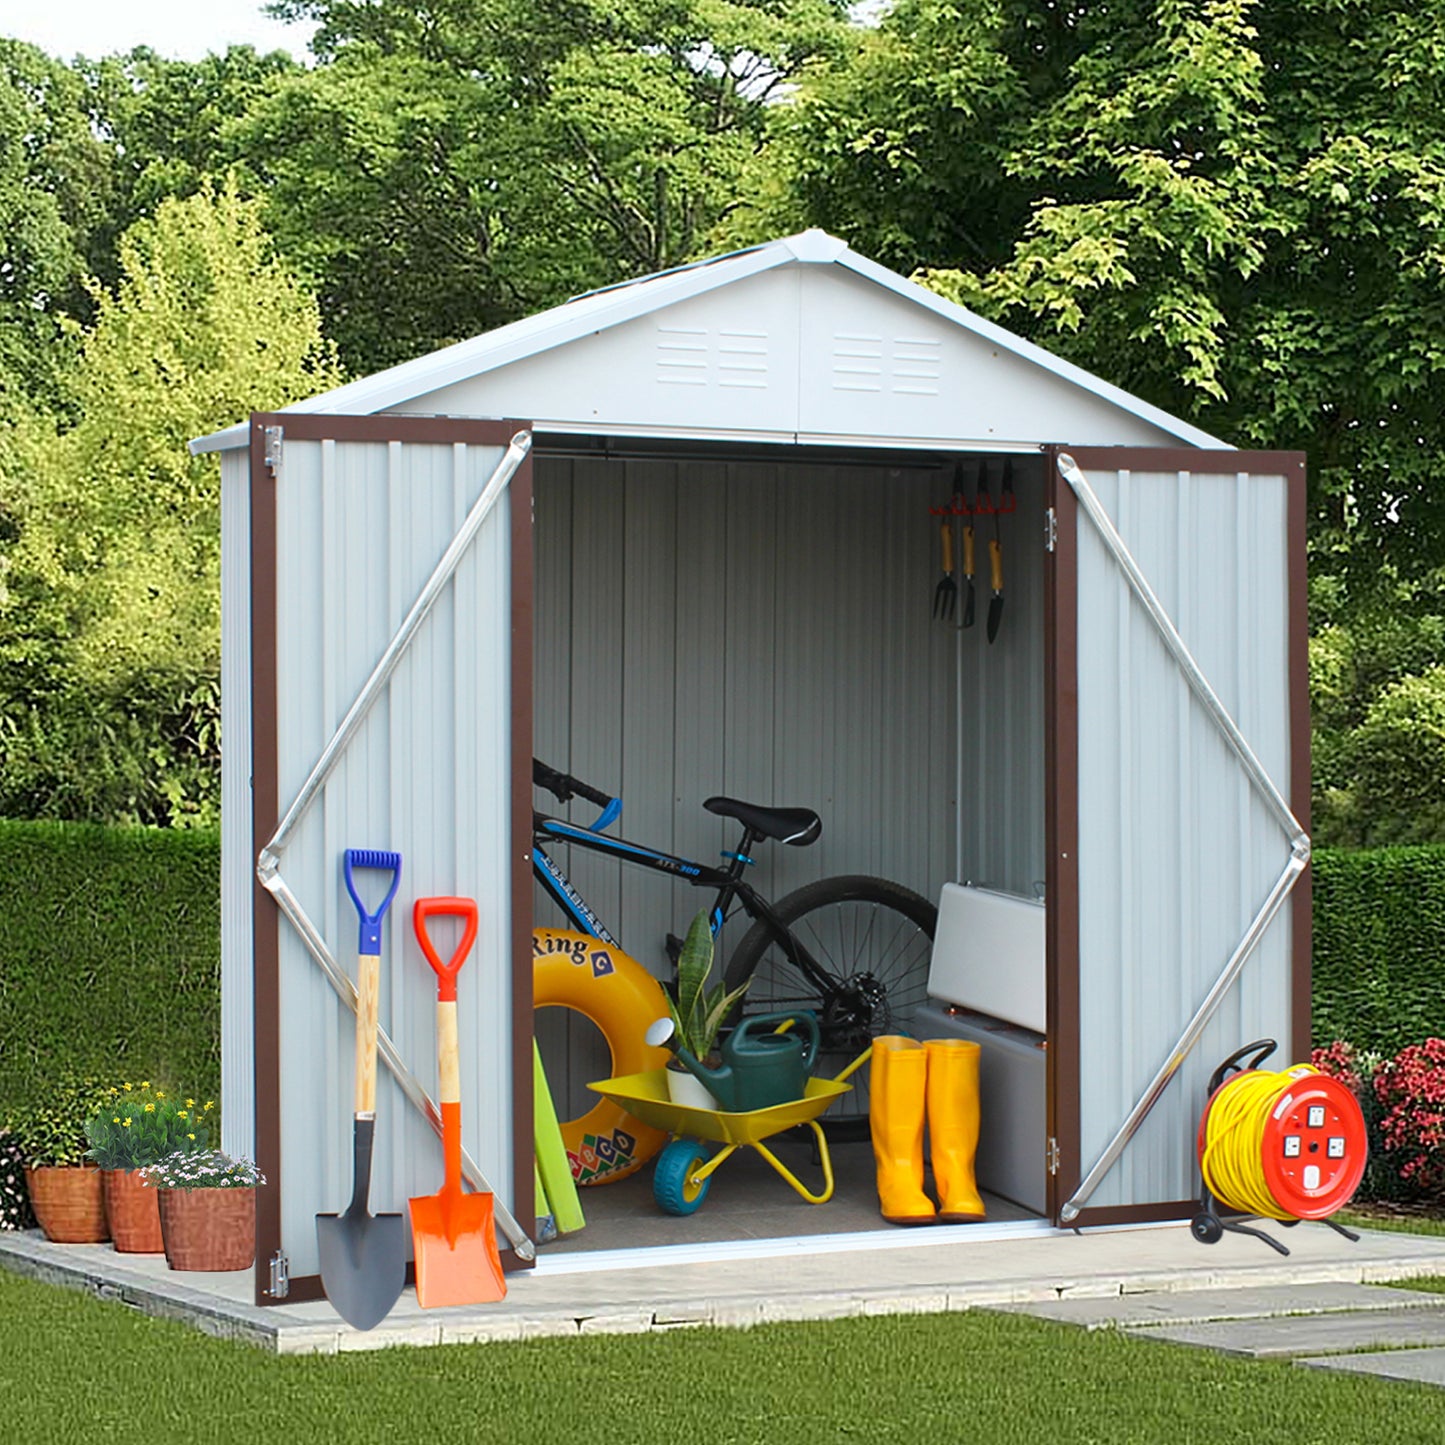 6' x 4' Outdoor Metal Storage Shed, Tools Storage Shed, Galvanized Steel Garden Shed with Lockable Doors, Outdoor Storage Shed for Backyard, Patio, Lawn, Y038